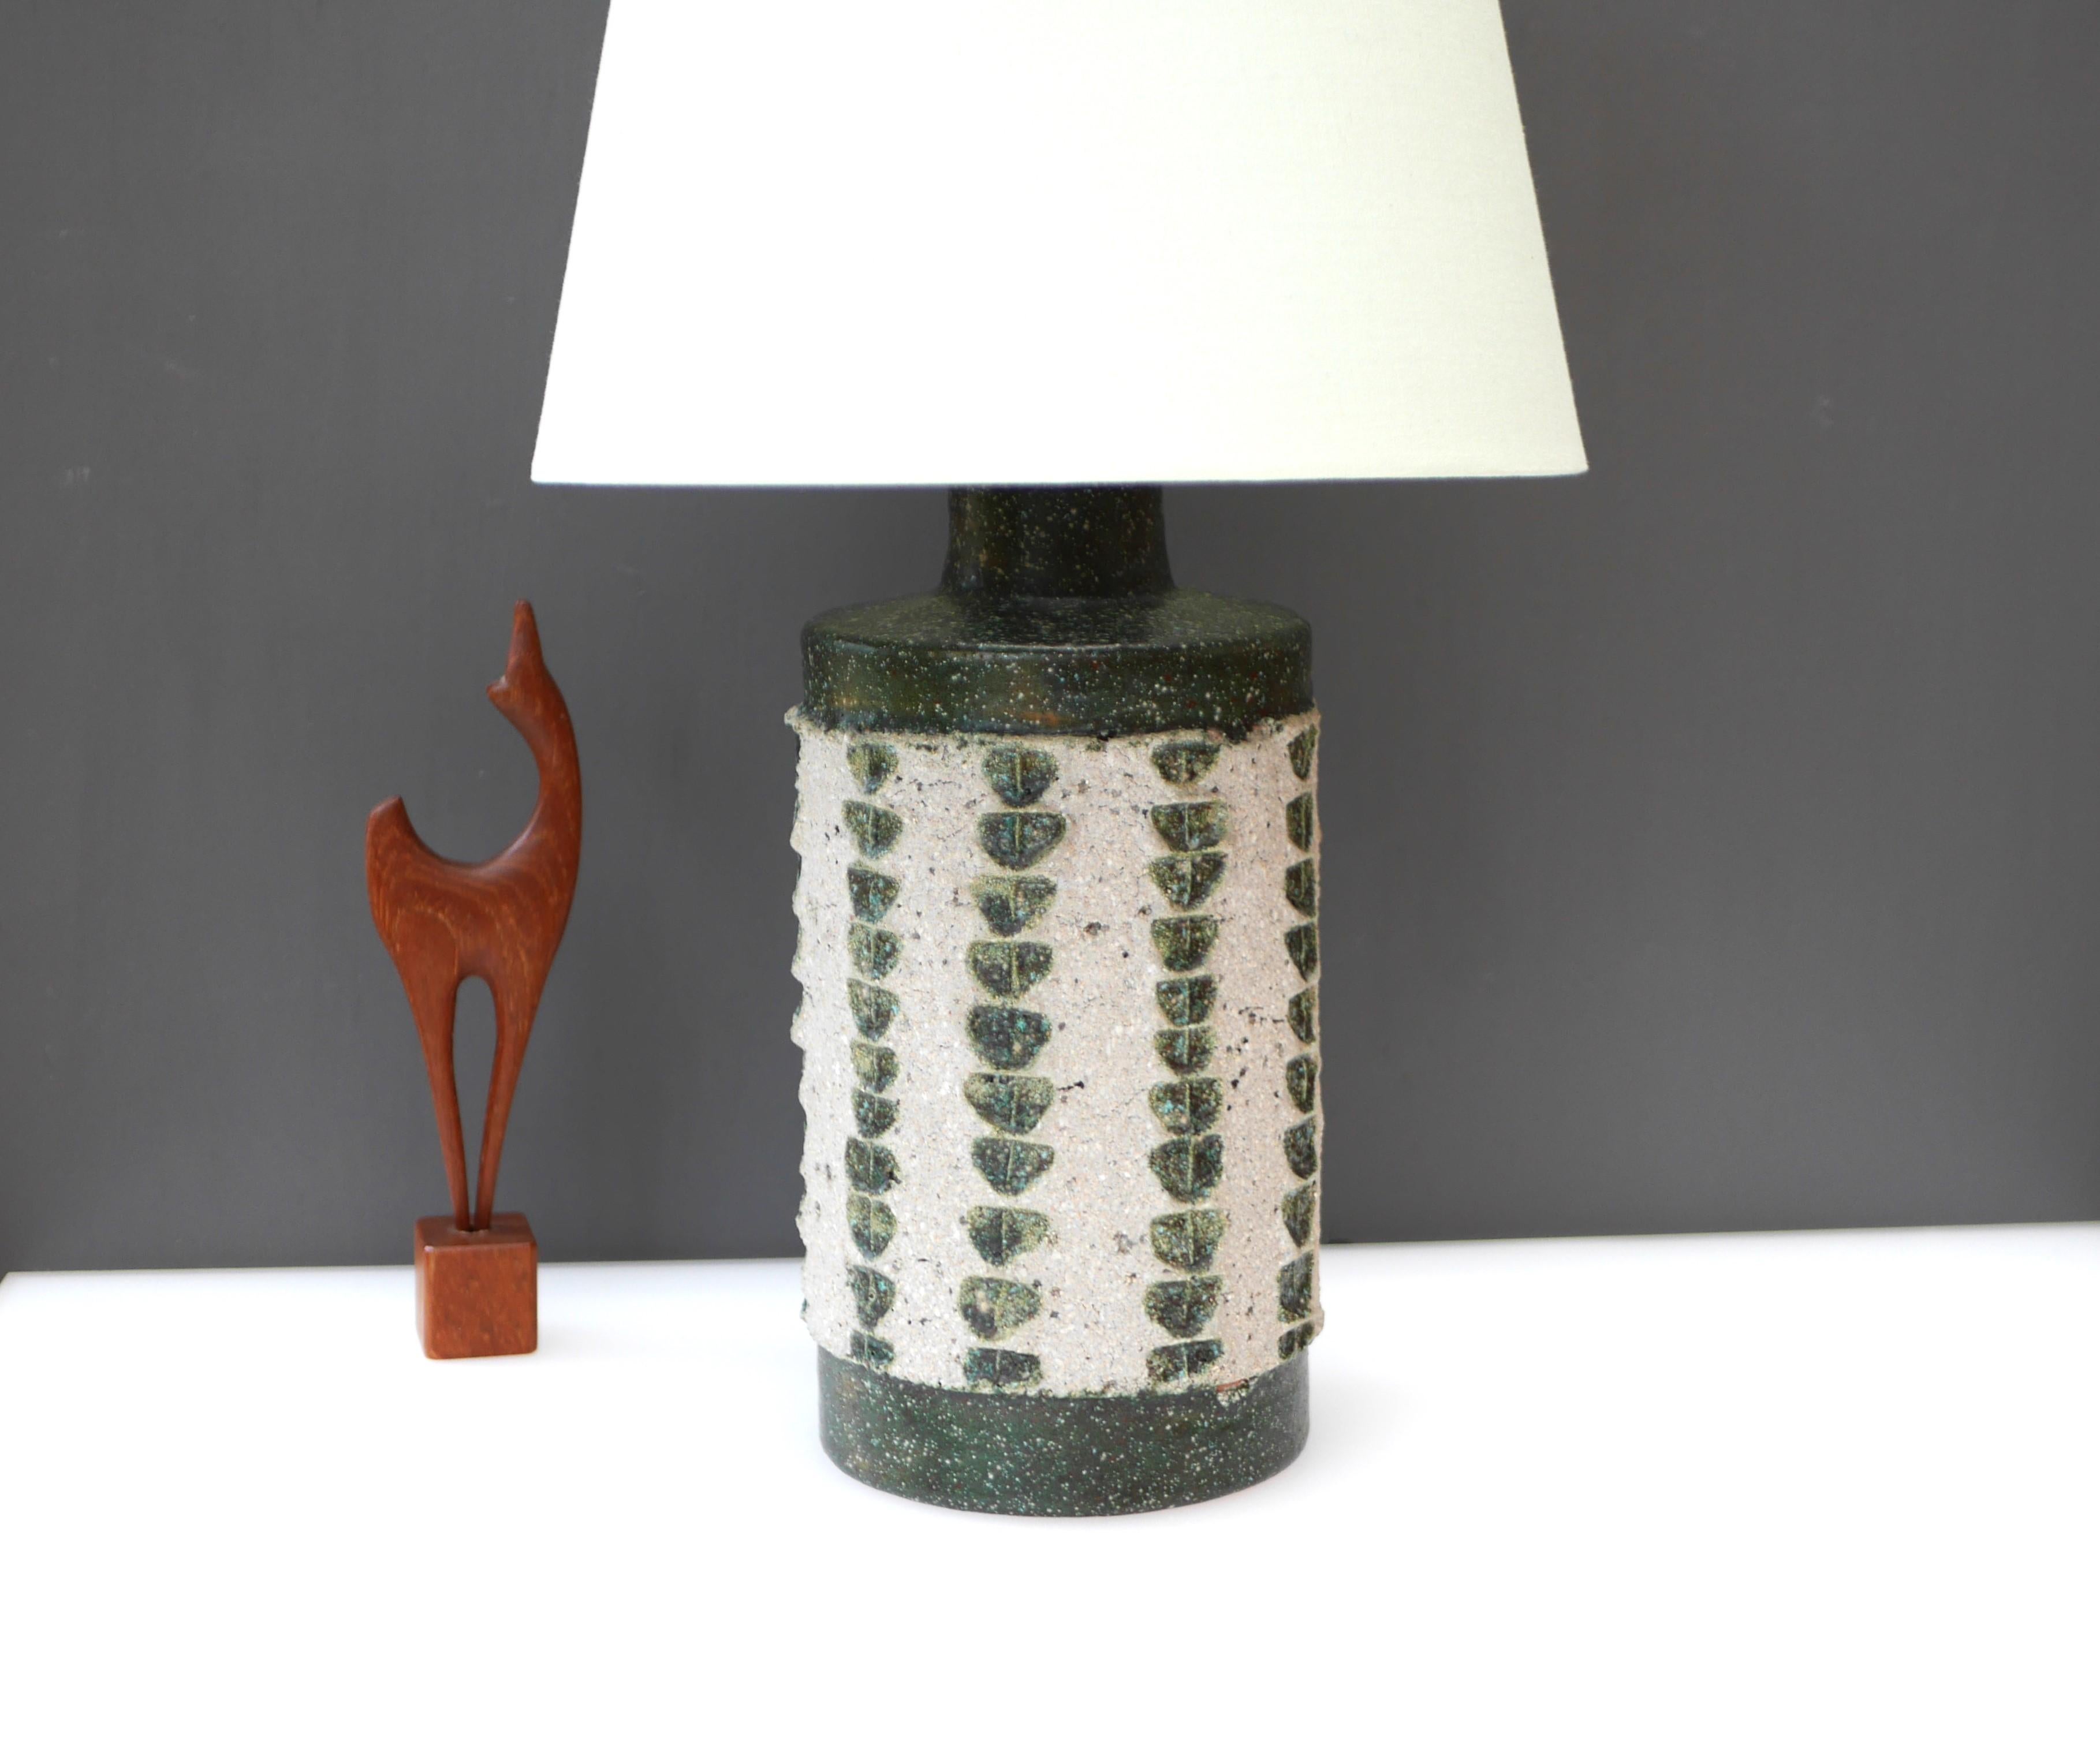 Hand-Crafted Table lamp by Nittsjö, Scandinavian ceramic art lamp By Thomas Hellström For Sale